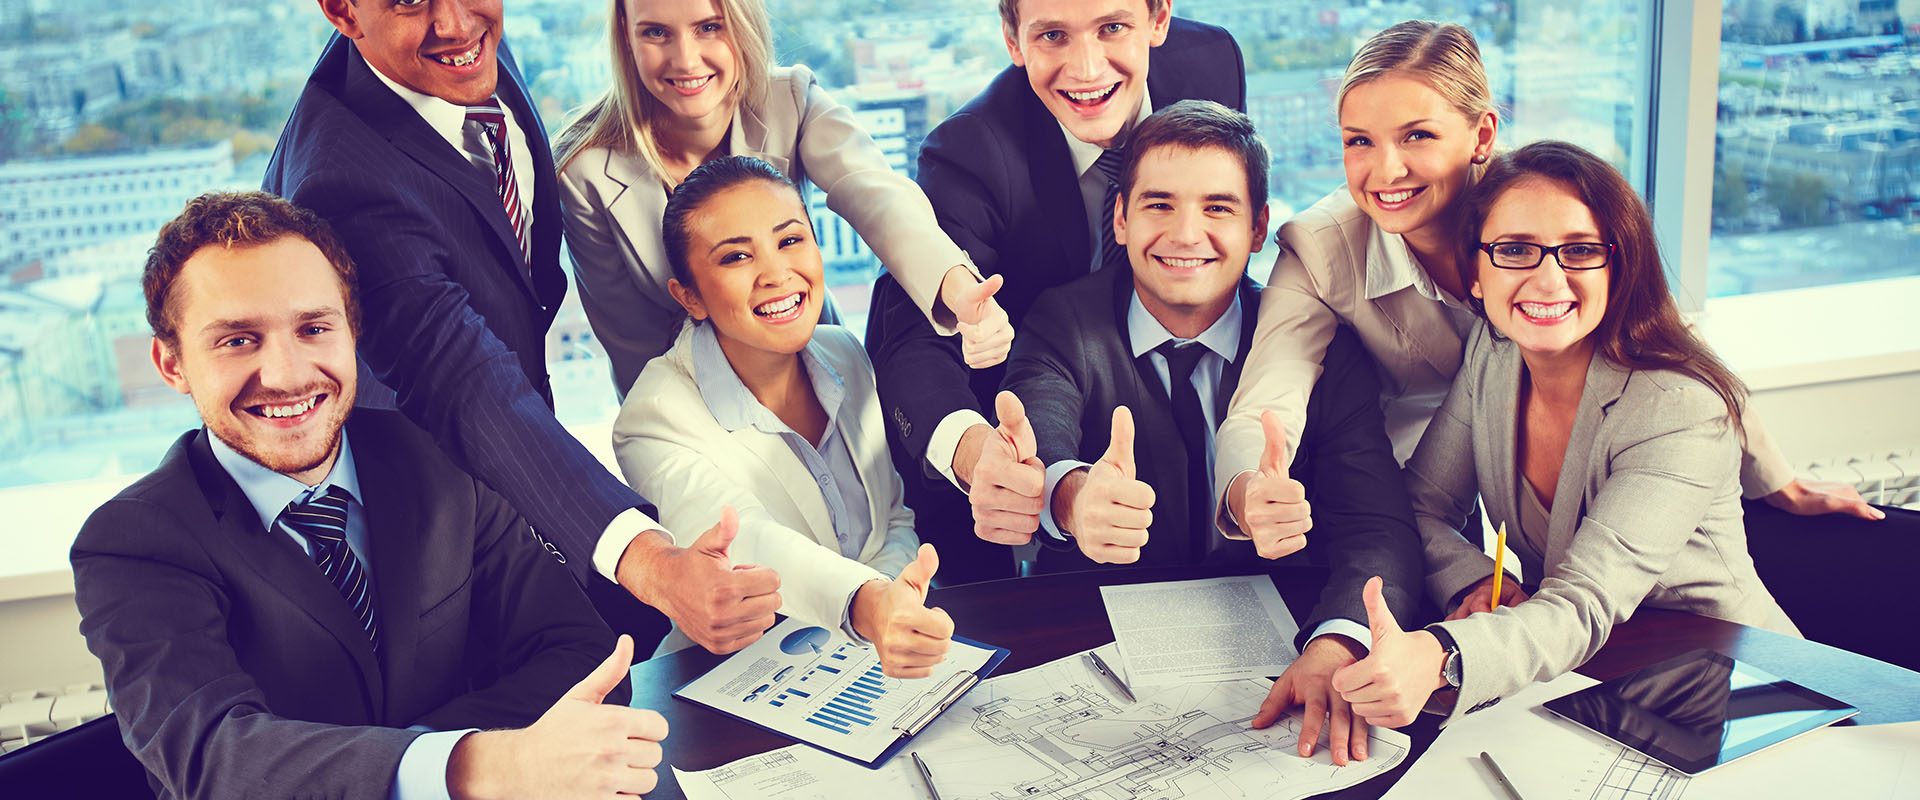 Group of business partners showing thumbs up while sitting at workplace in office